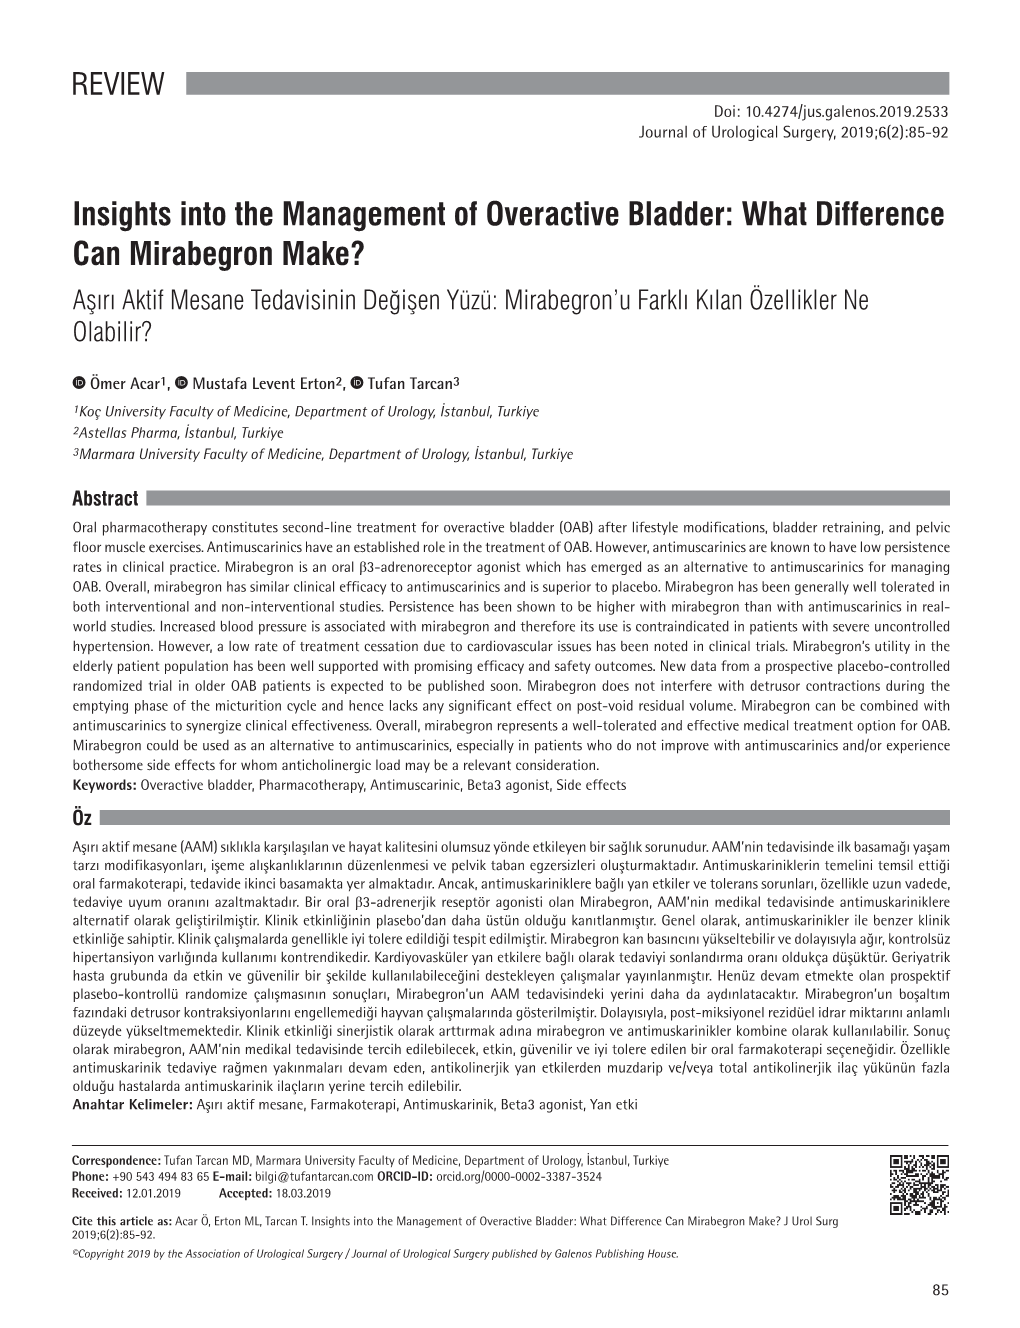 Insights Into the Management of Overactive Bladder: What Difference Can Mirabegron Make?